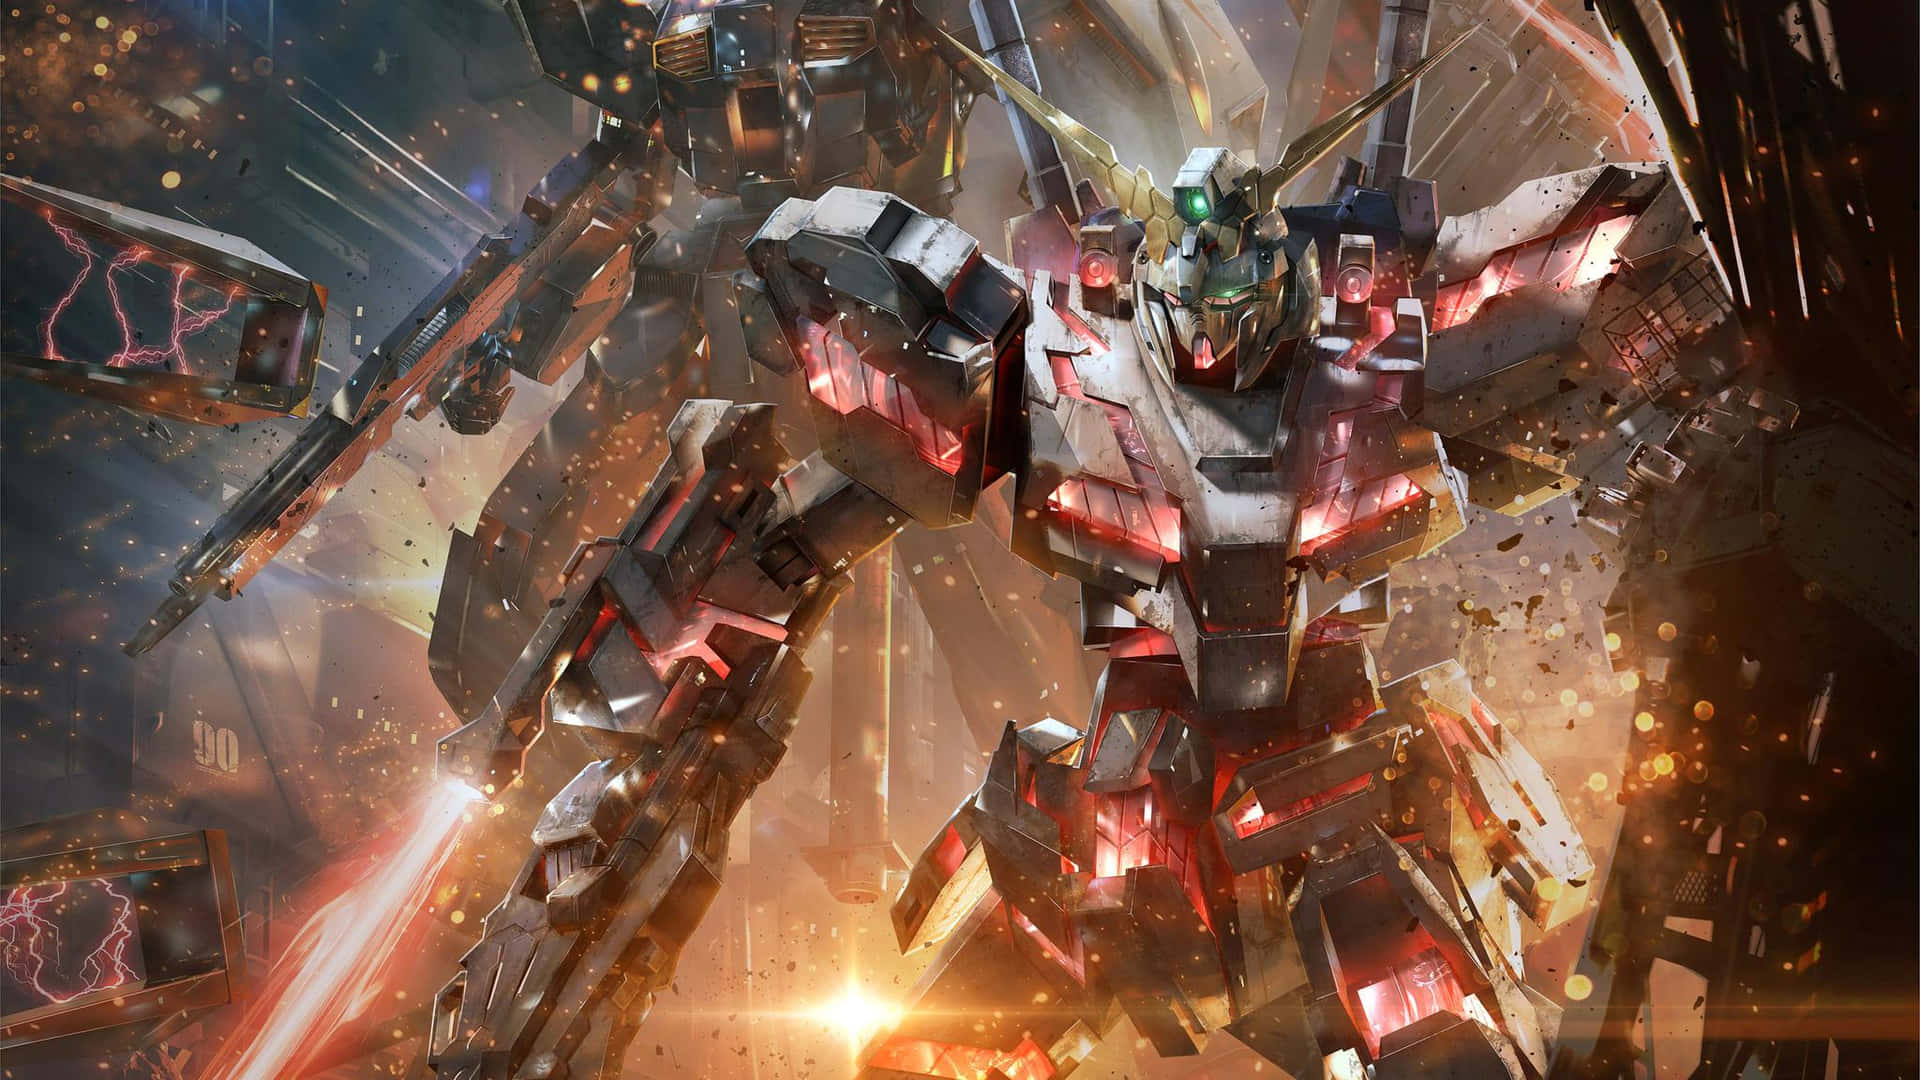 Inspired by an epic space saga, the mighty Gundam unicorn lights the way in times of darkness. Wallpaper